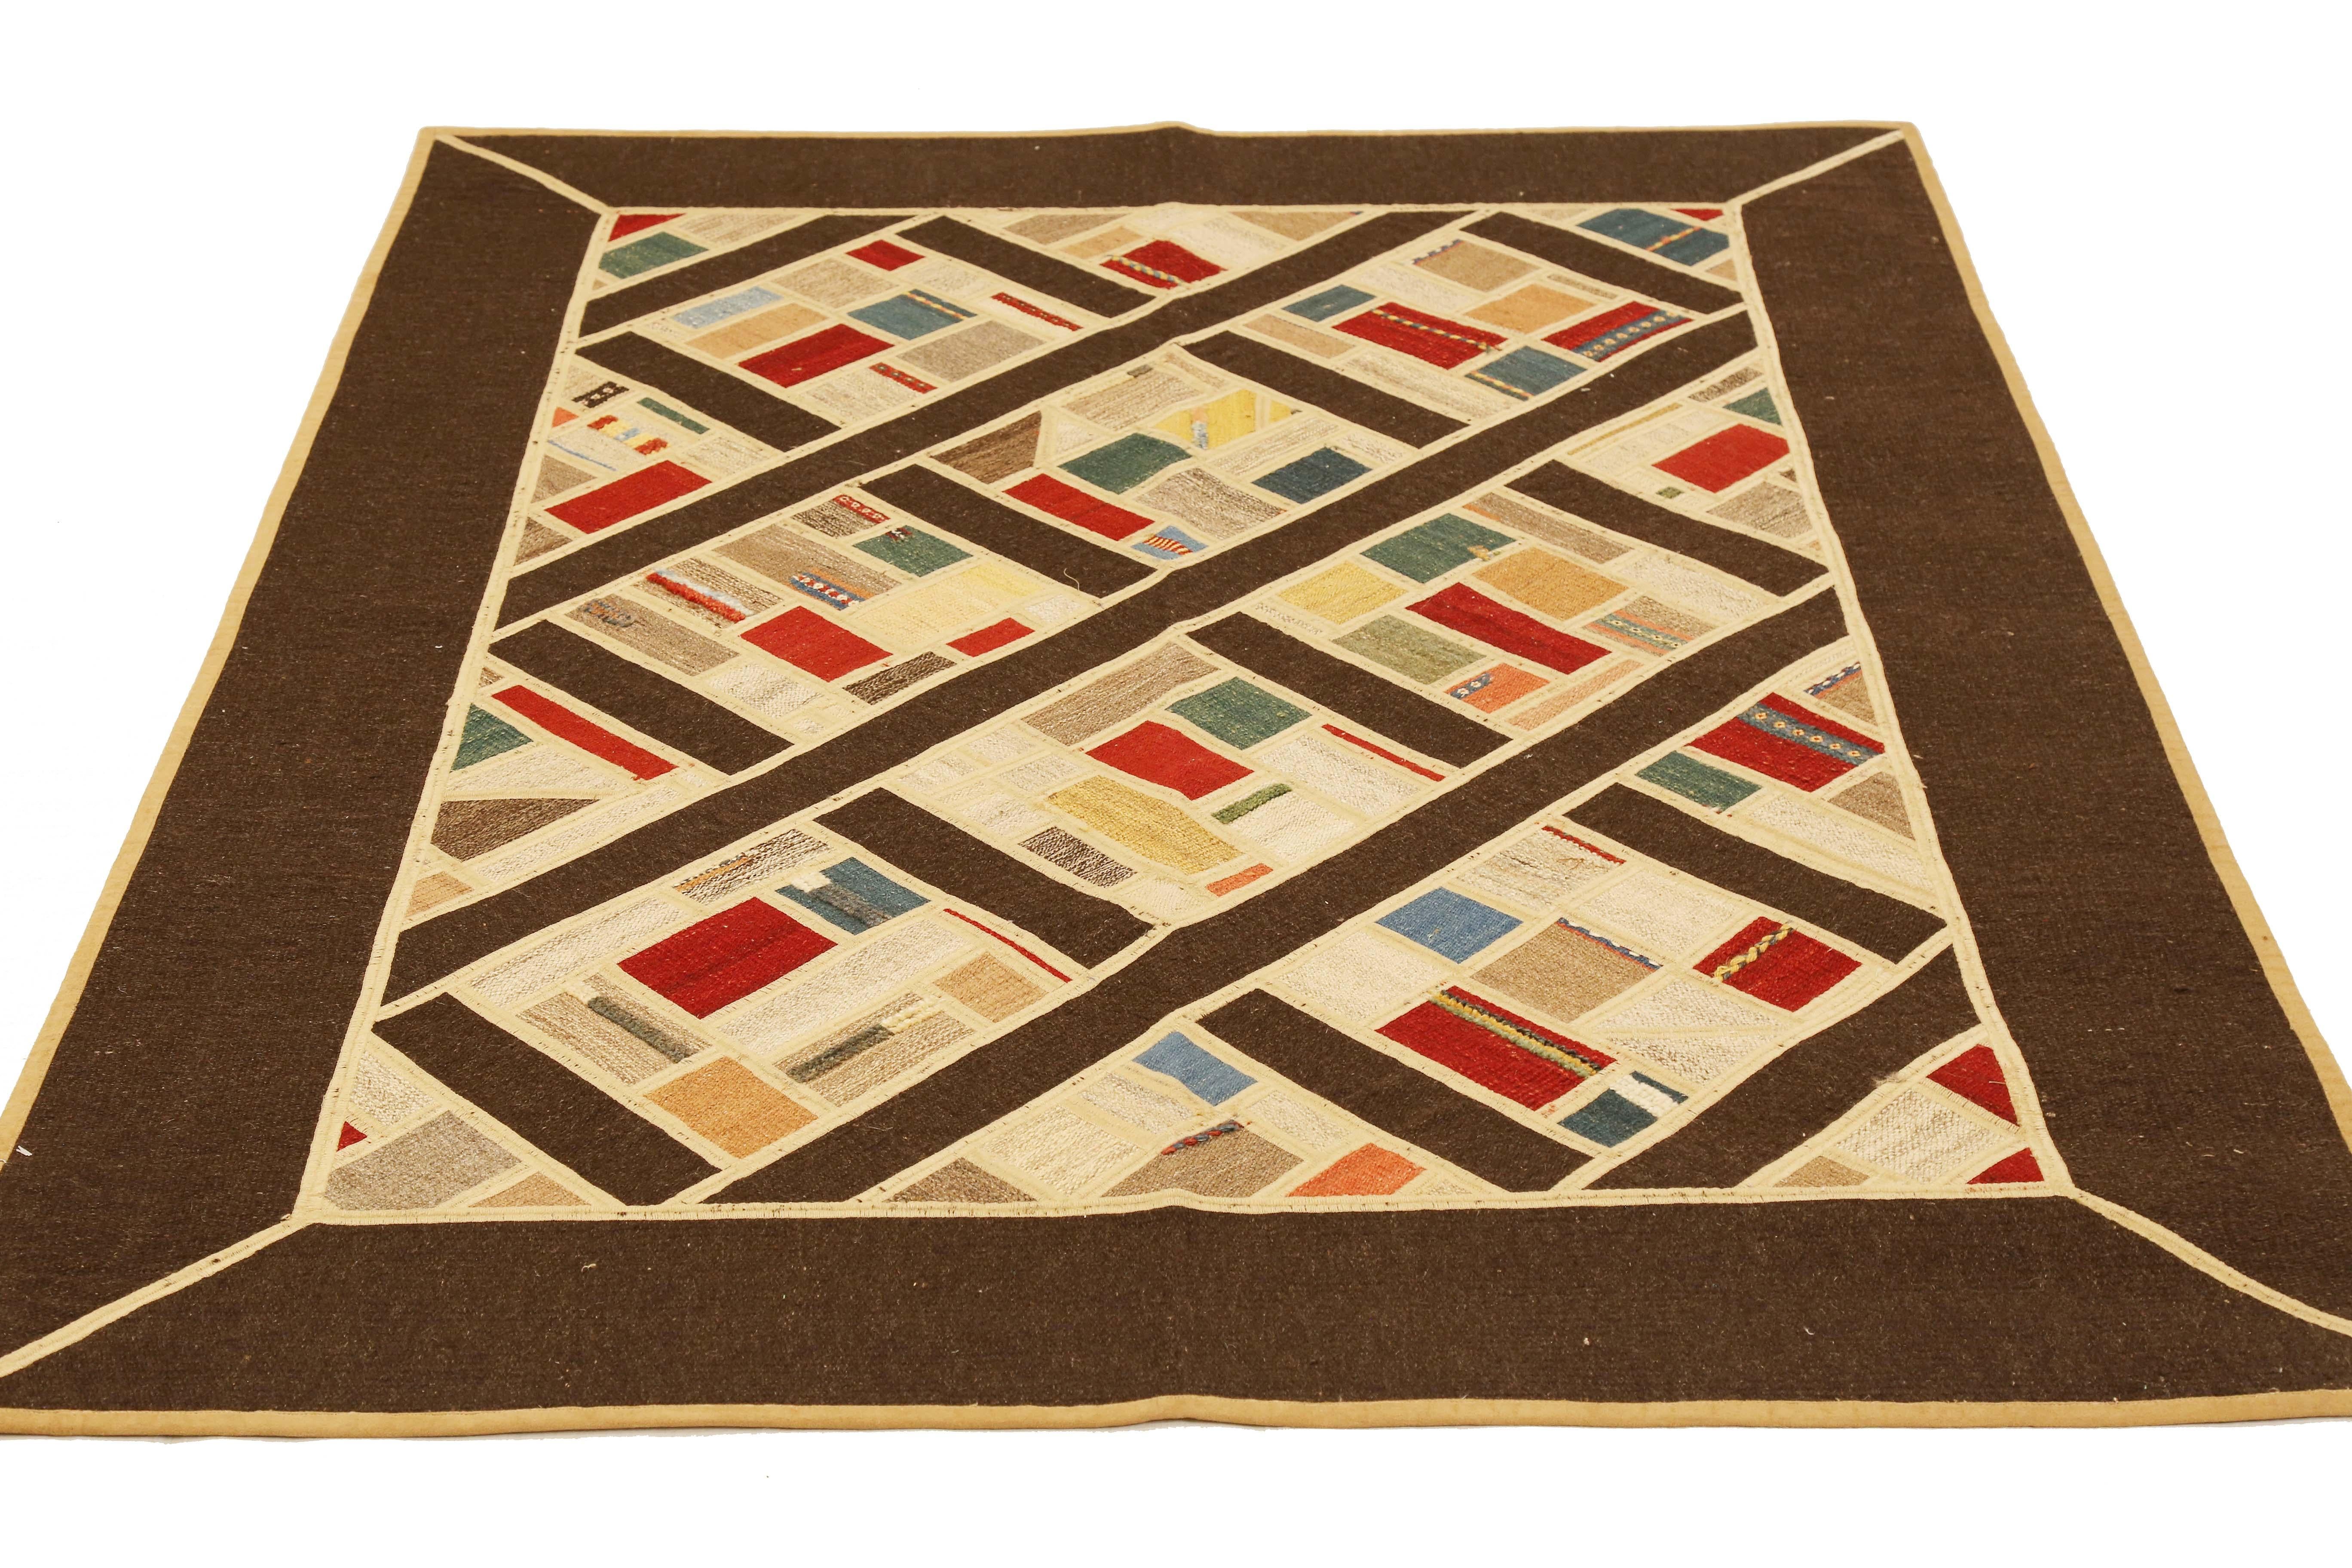 Modern Turkish rug handwoven from the finest sheep’s wool and colored with all-natural vegetable dyes that are safe for humans and pets. It’s a traditional Patch Kilim flat-weave design featuring colored squares on a brown field. It’s a stunning